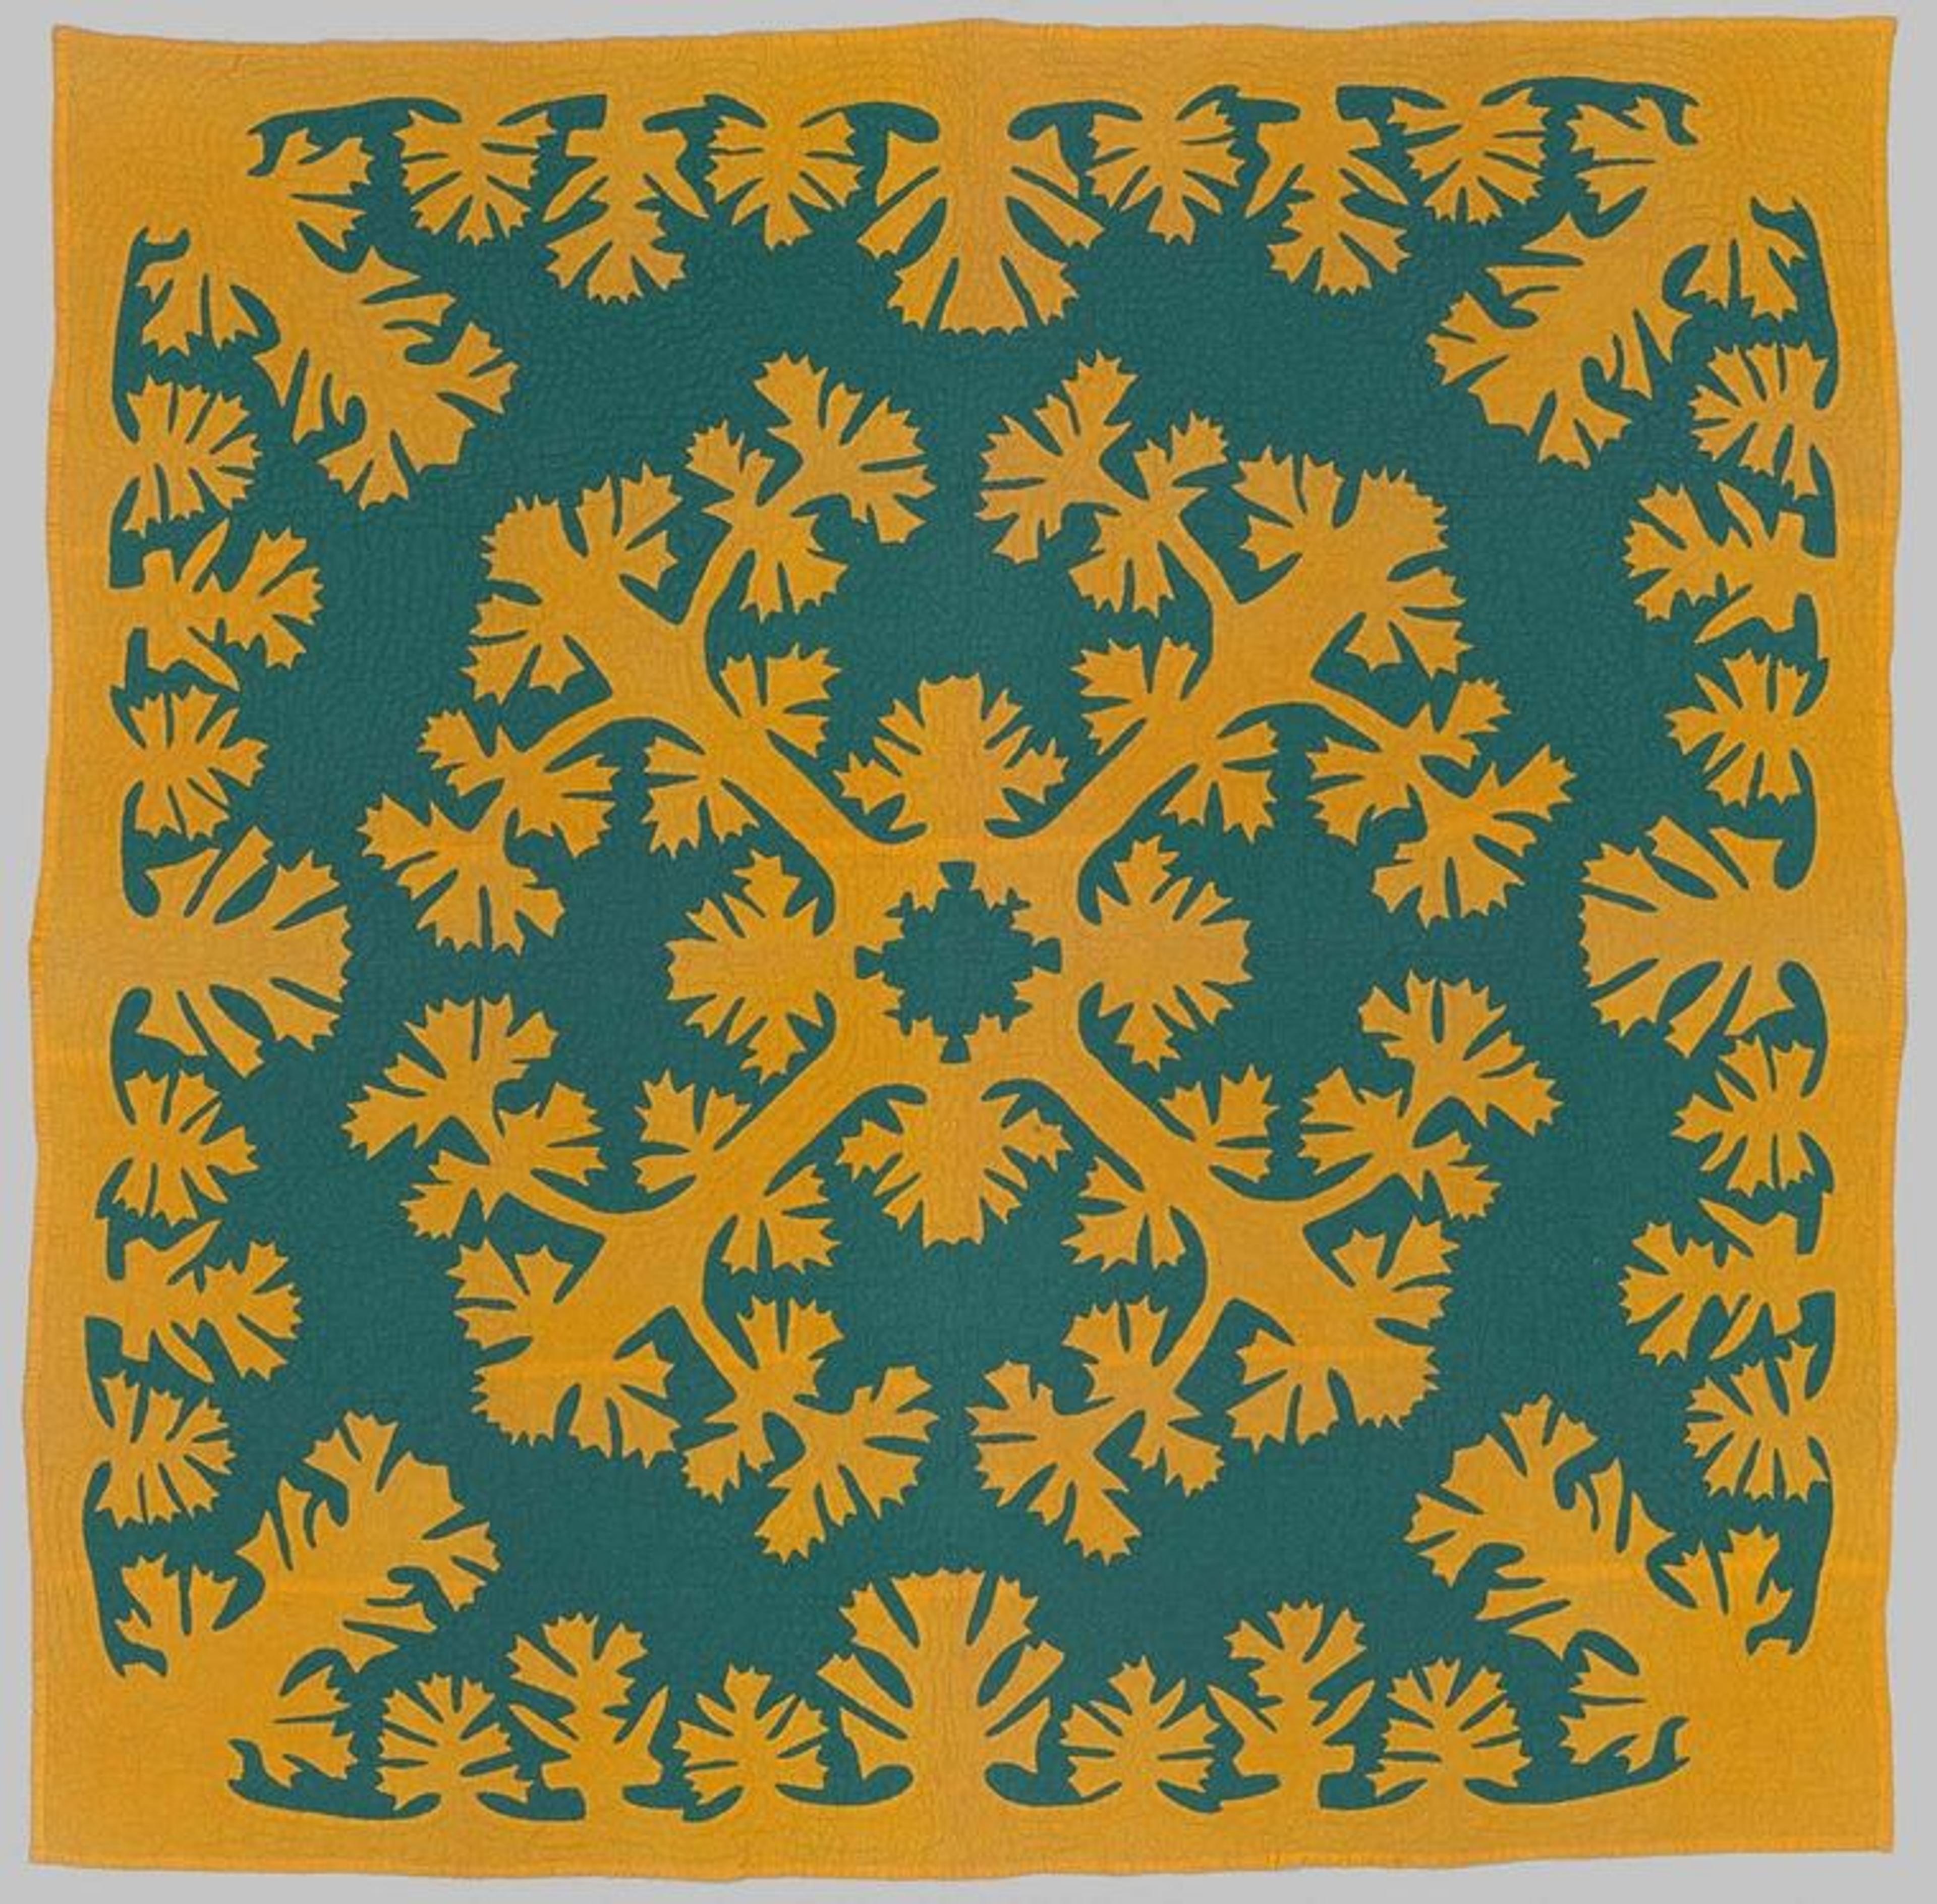 A teal quilt with yellow fringe and a symmetrical yellow design in its center. Both the center and edge designs feature complex, ornate, flower blossom-like patterns that extend identically into all four corners of the quilt.